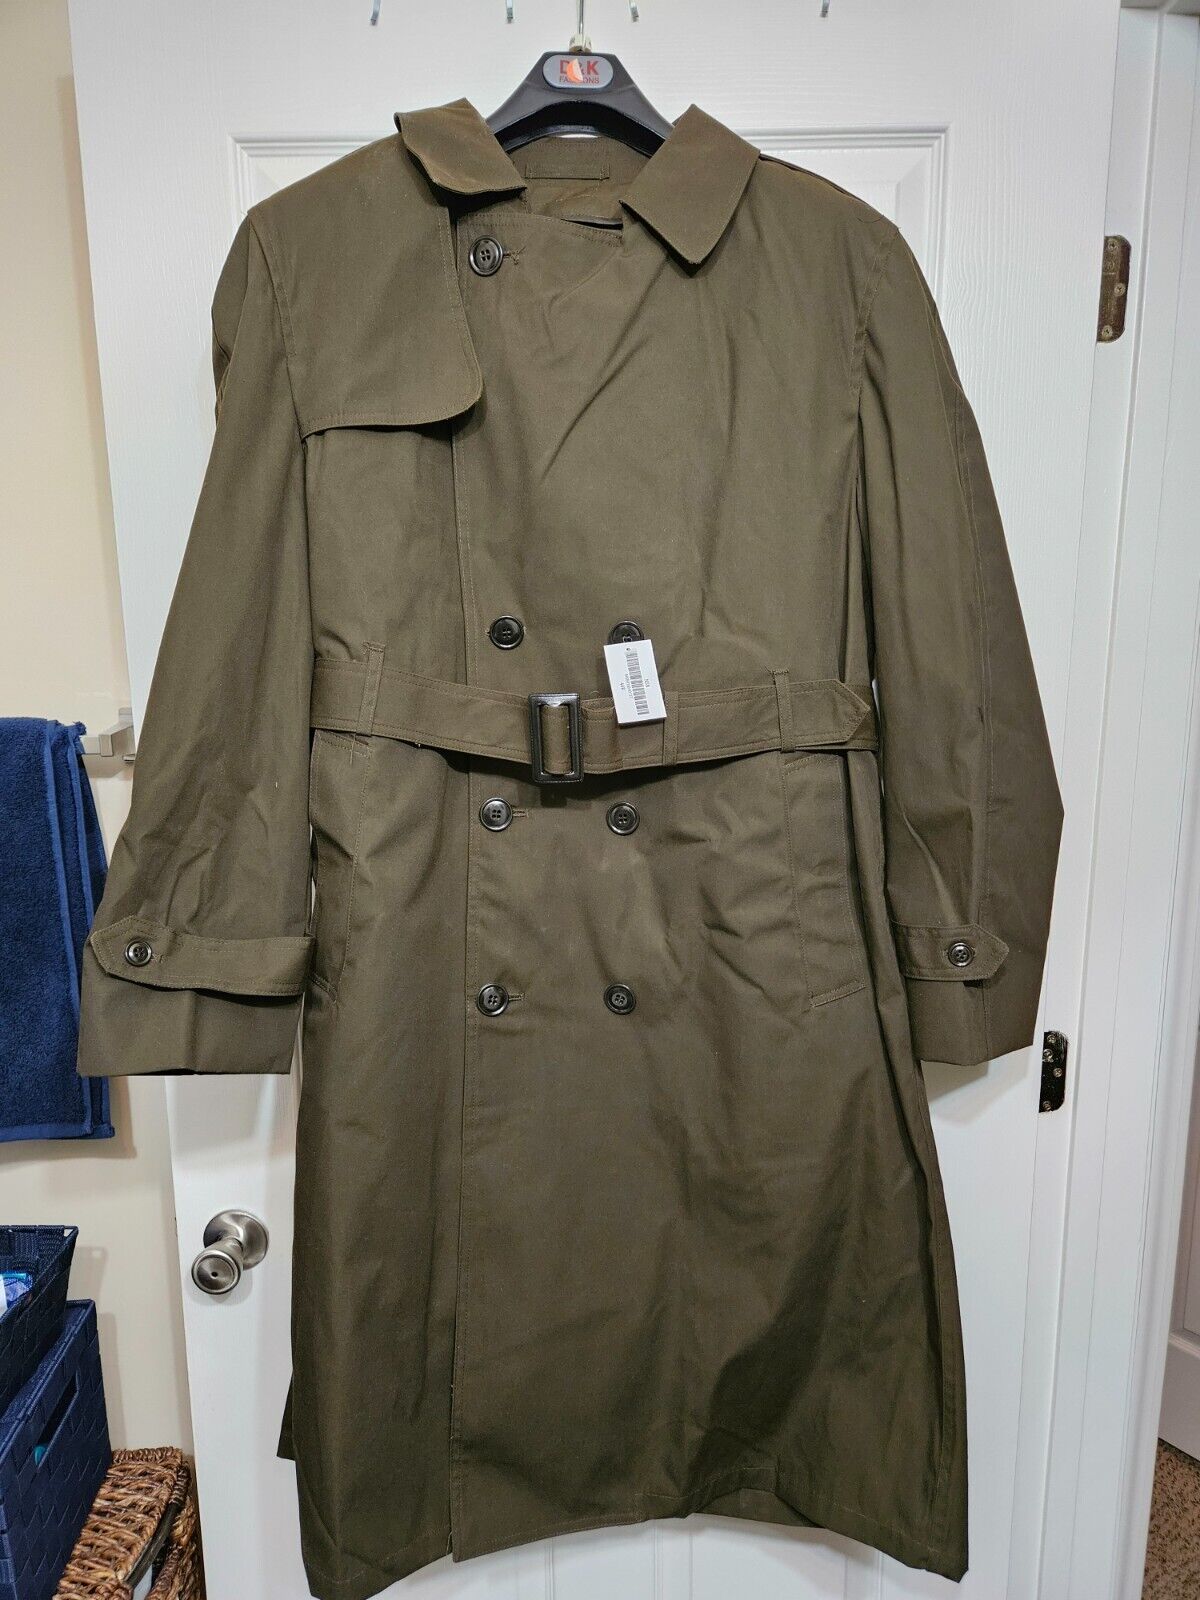 Current Army Dress Pinks And Greens Jacket Size 44 R